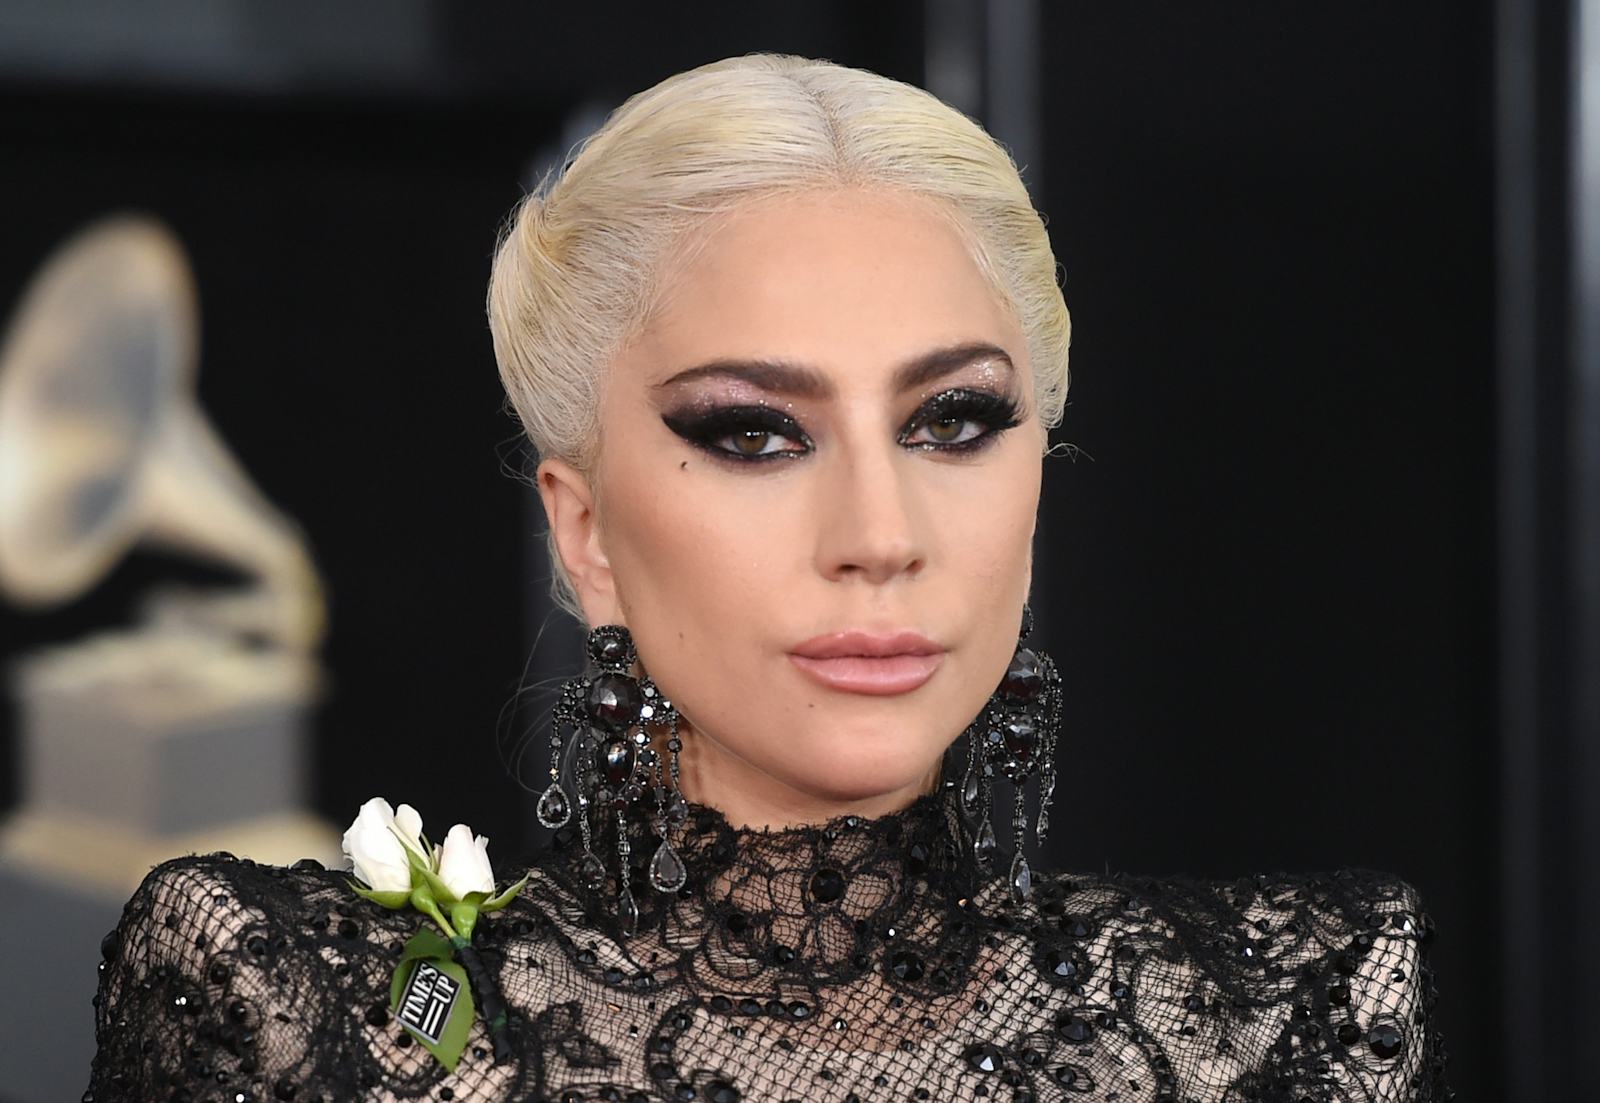 Will Lady Gaga Tour The UK In 2019? Here's How You Can Be The First To